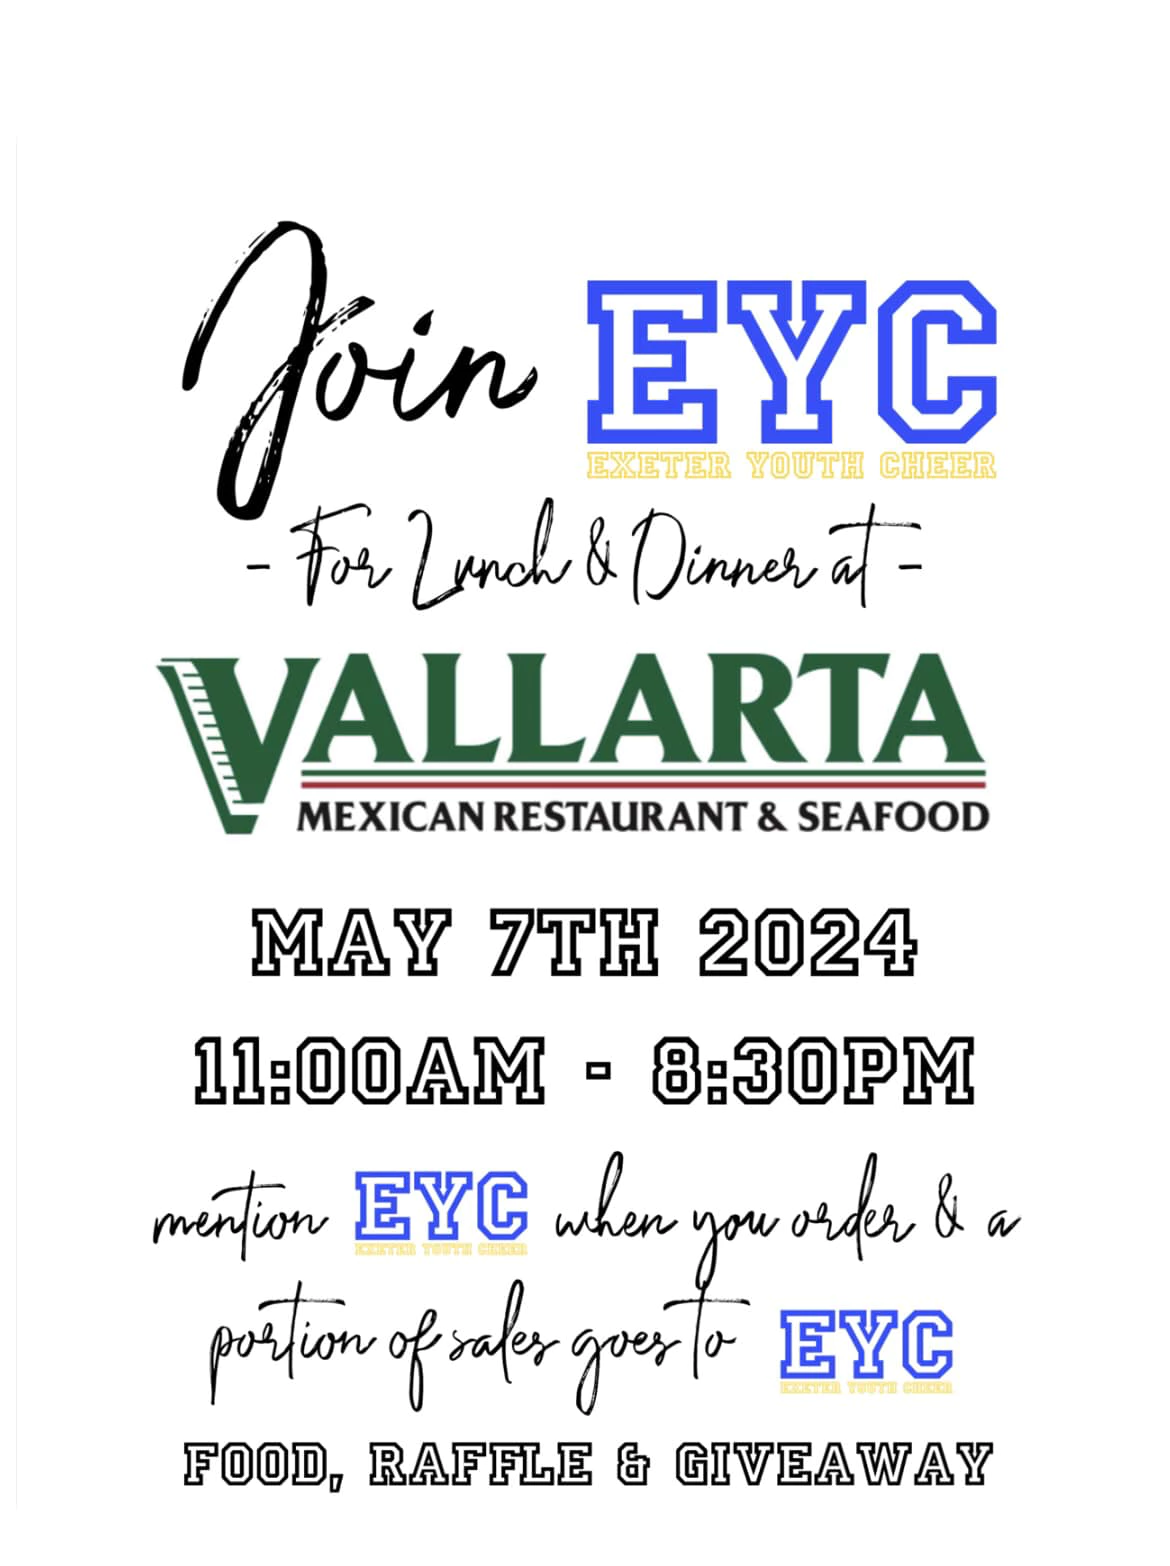 Mention EYC when you order and a portion of sales goes to benefit Exeter Youth Cheer.